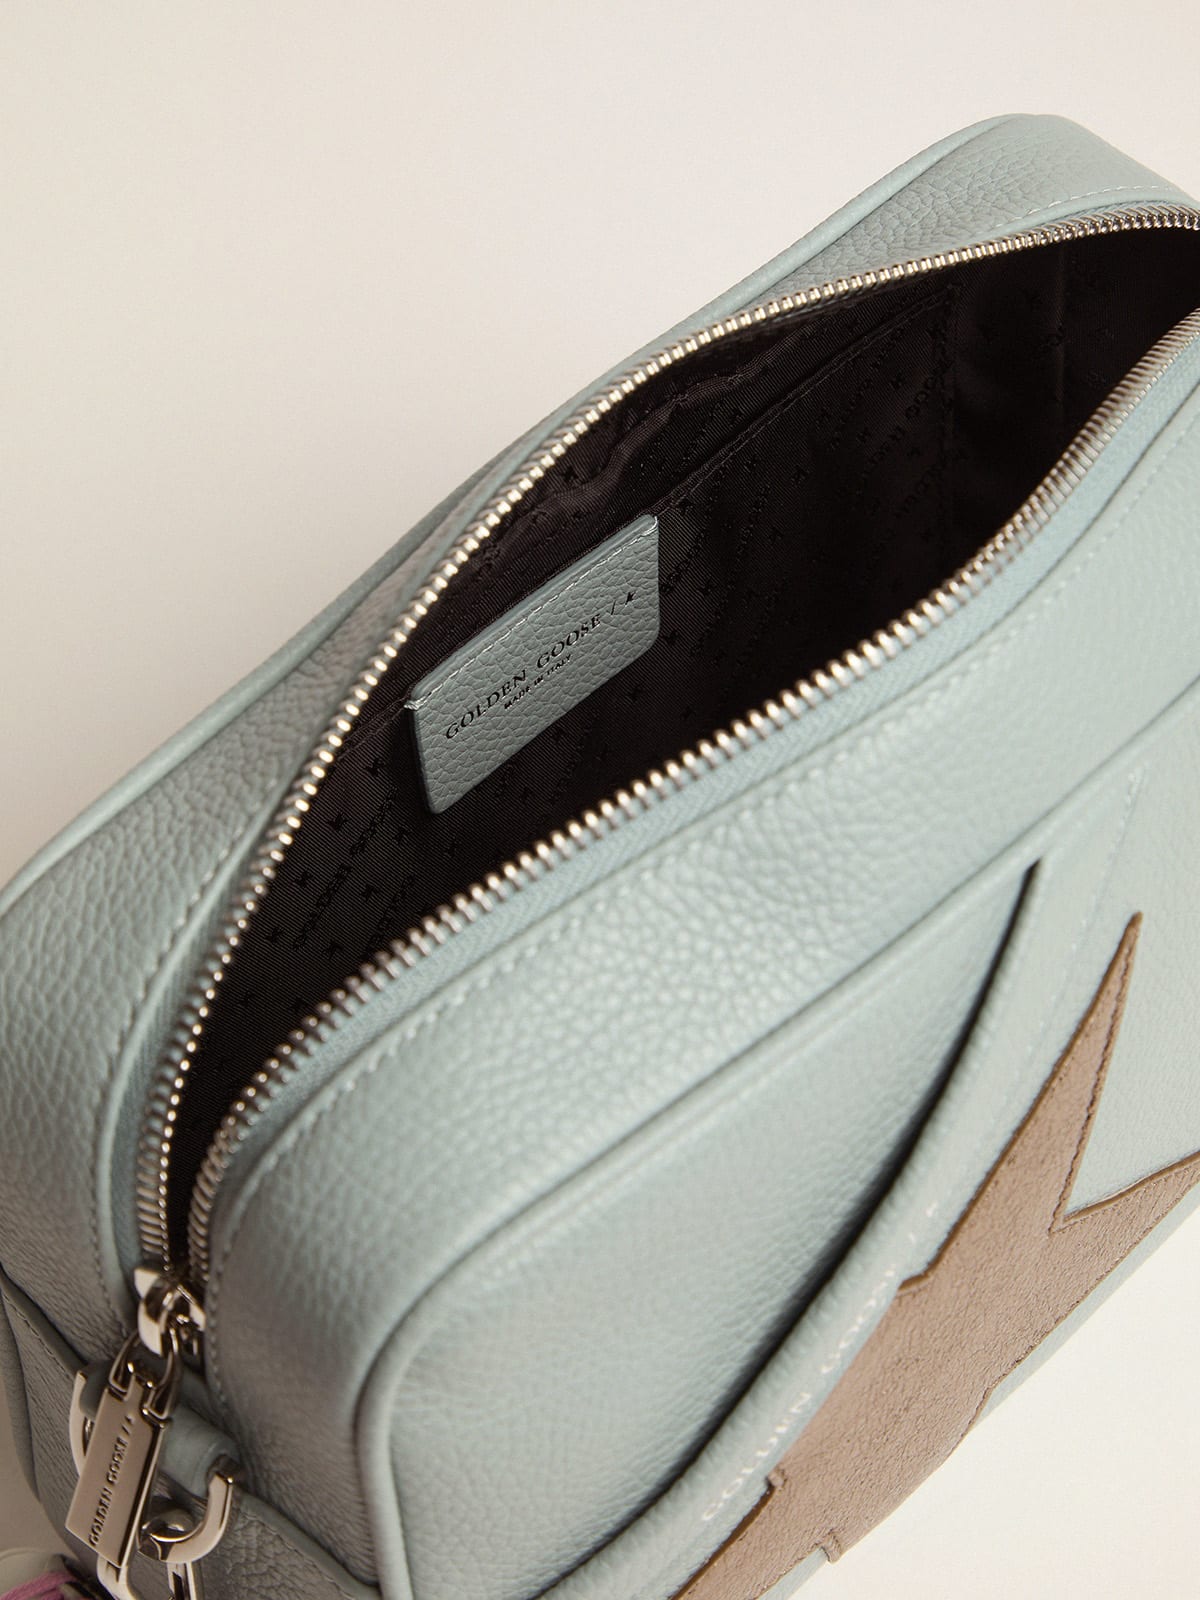 Golden Goose - Aquamarine Star Bag made of hammered leather with dark silver star in 